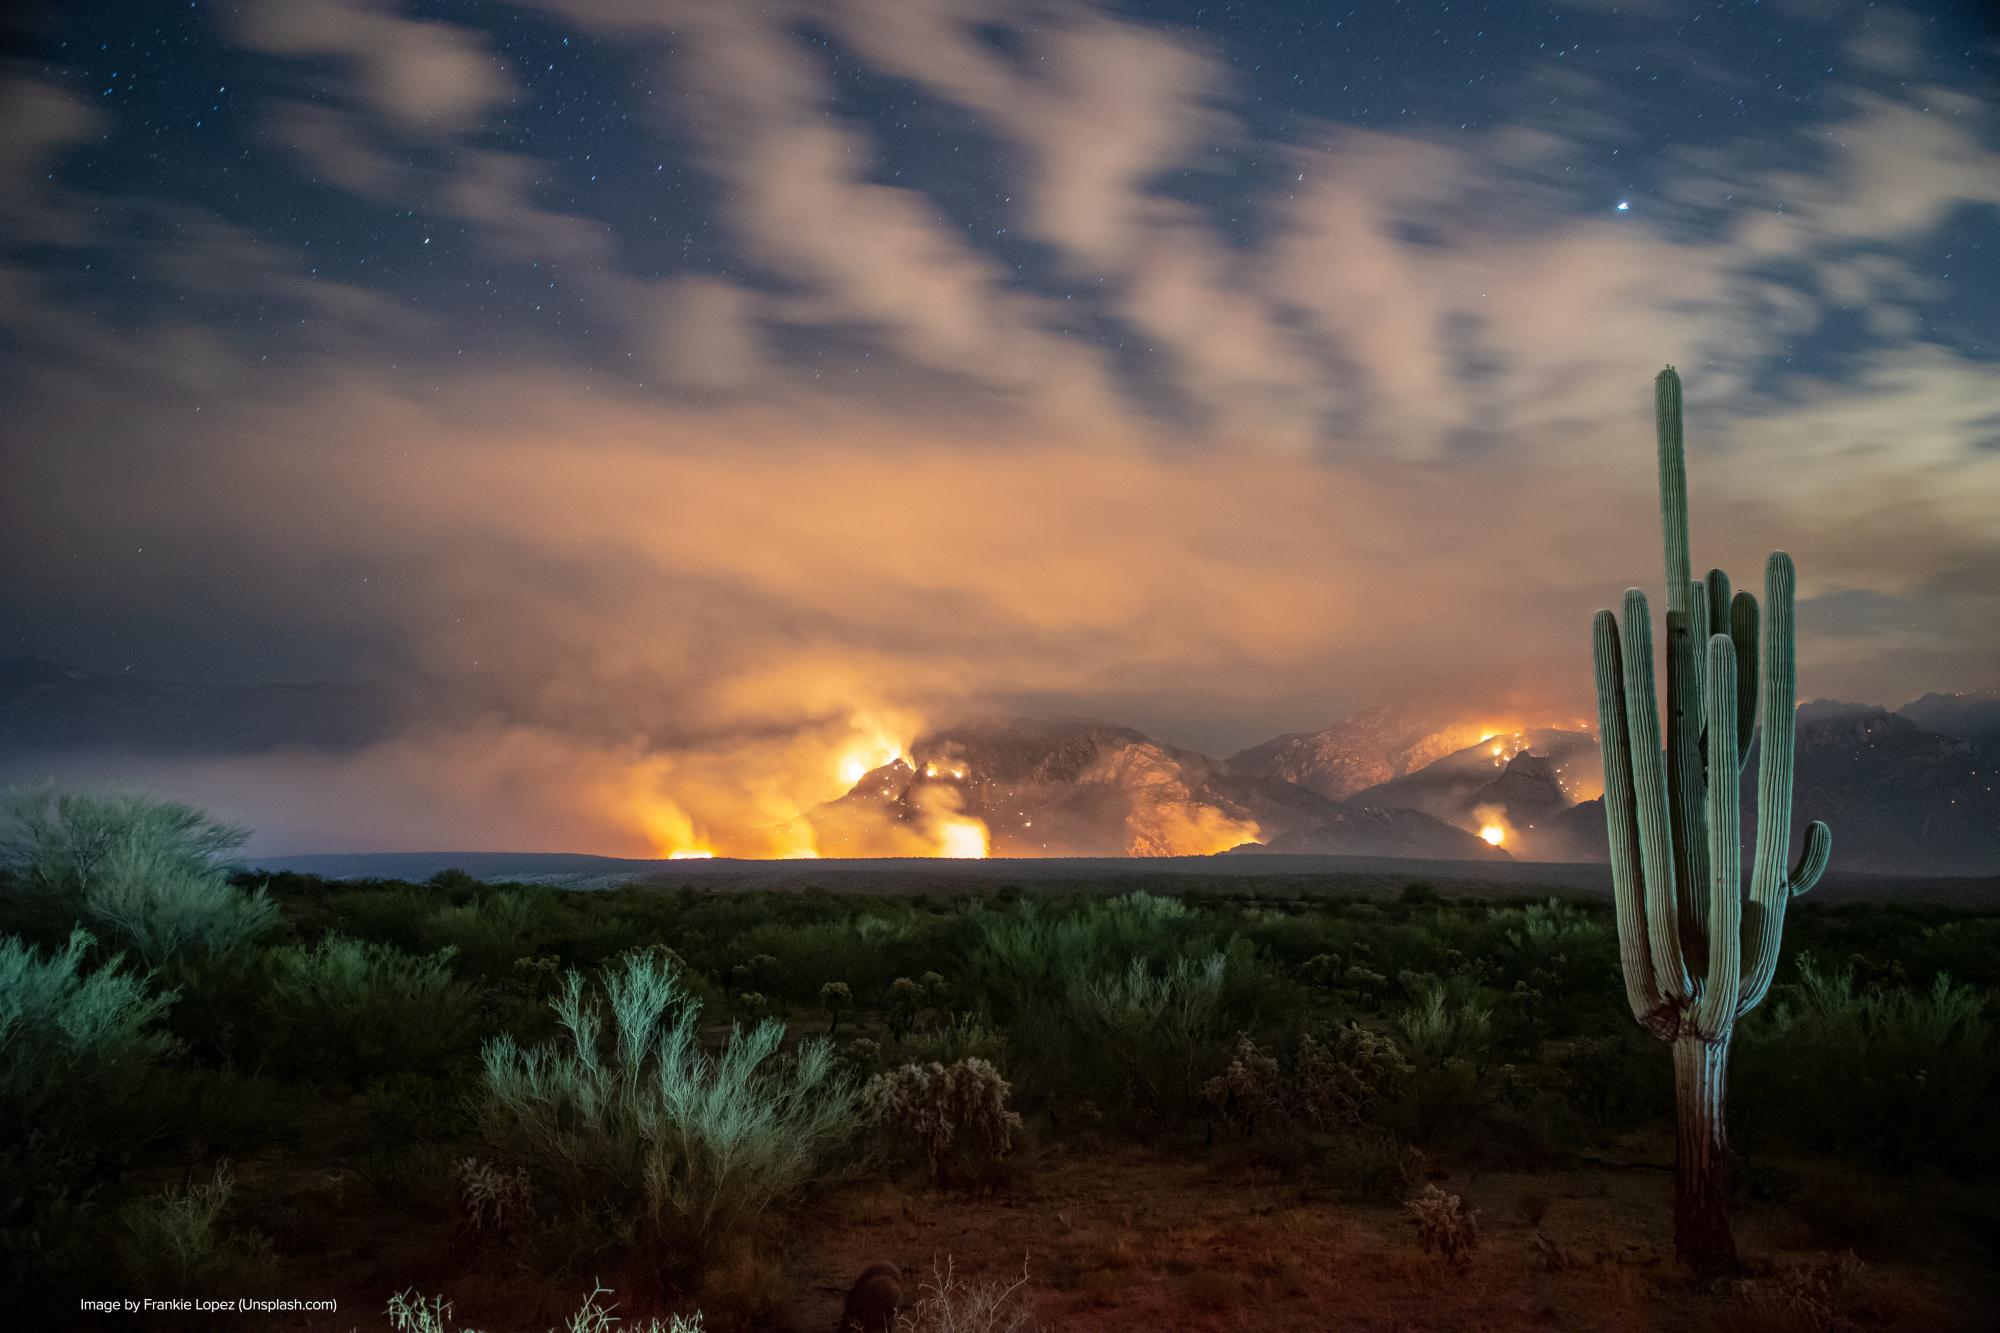 mountain on fire with cactus in foreground